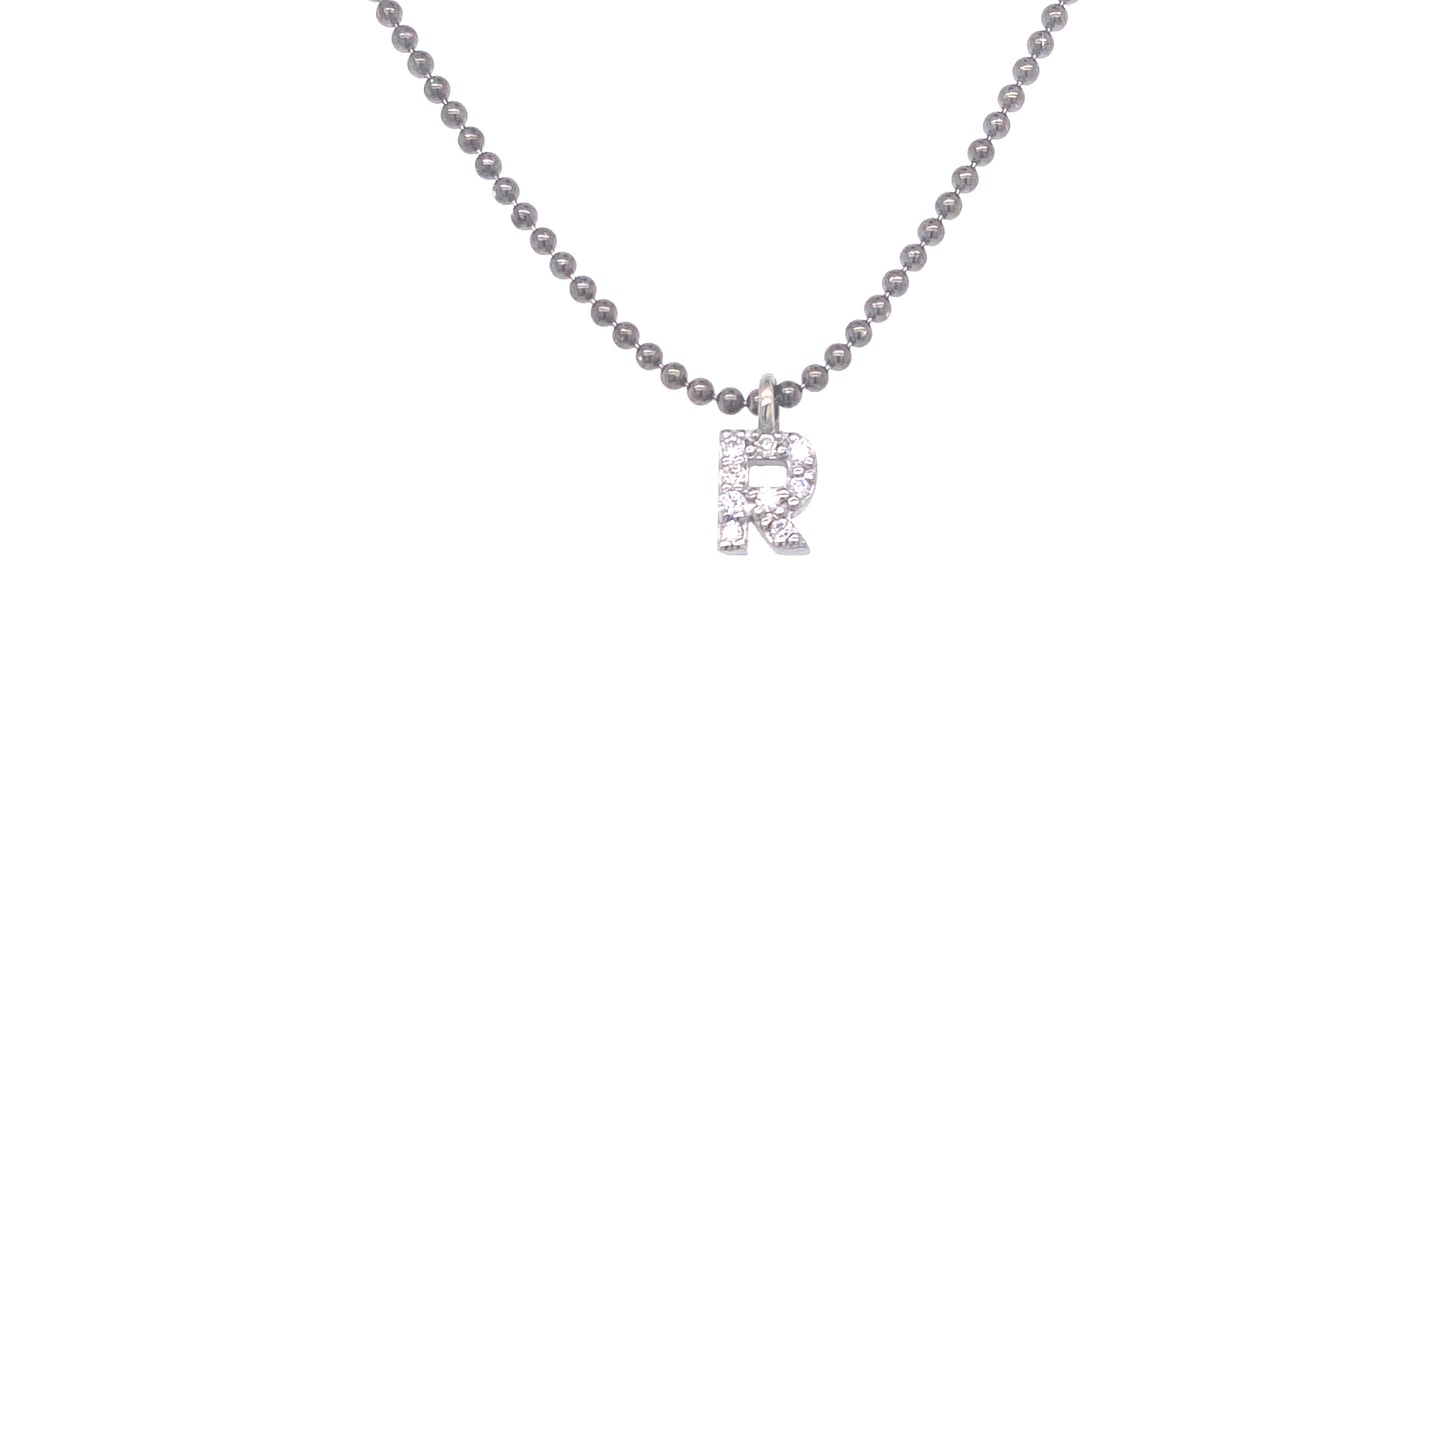 Necklace With Small Initial R and Diamond | Bernat Rubi | Luby 